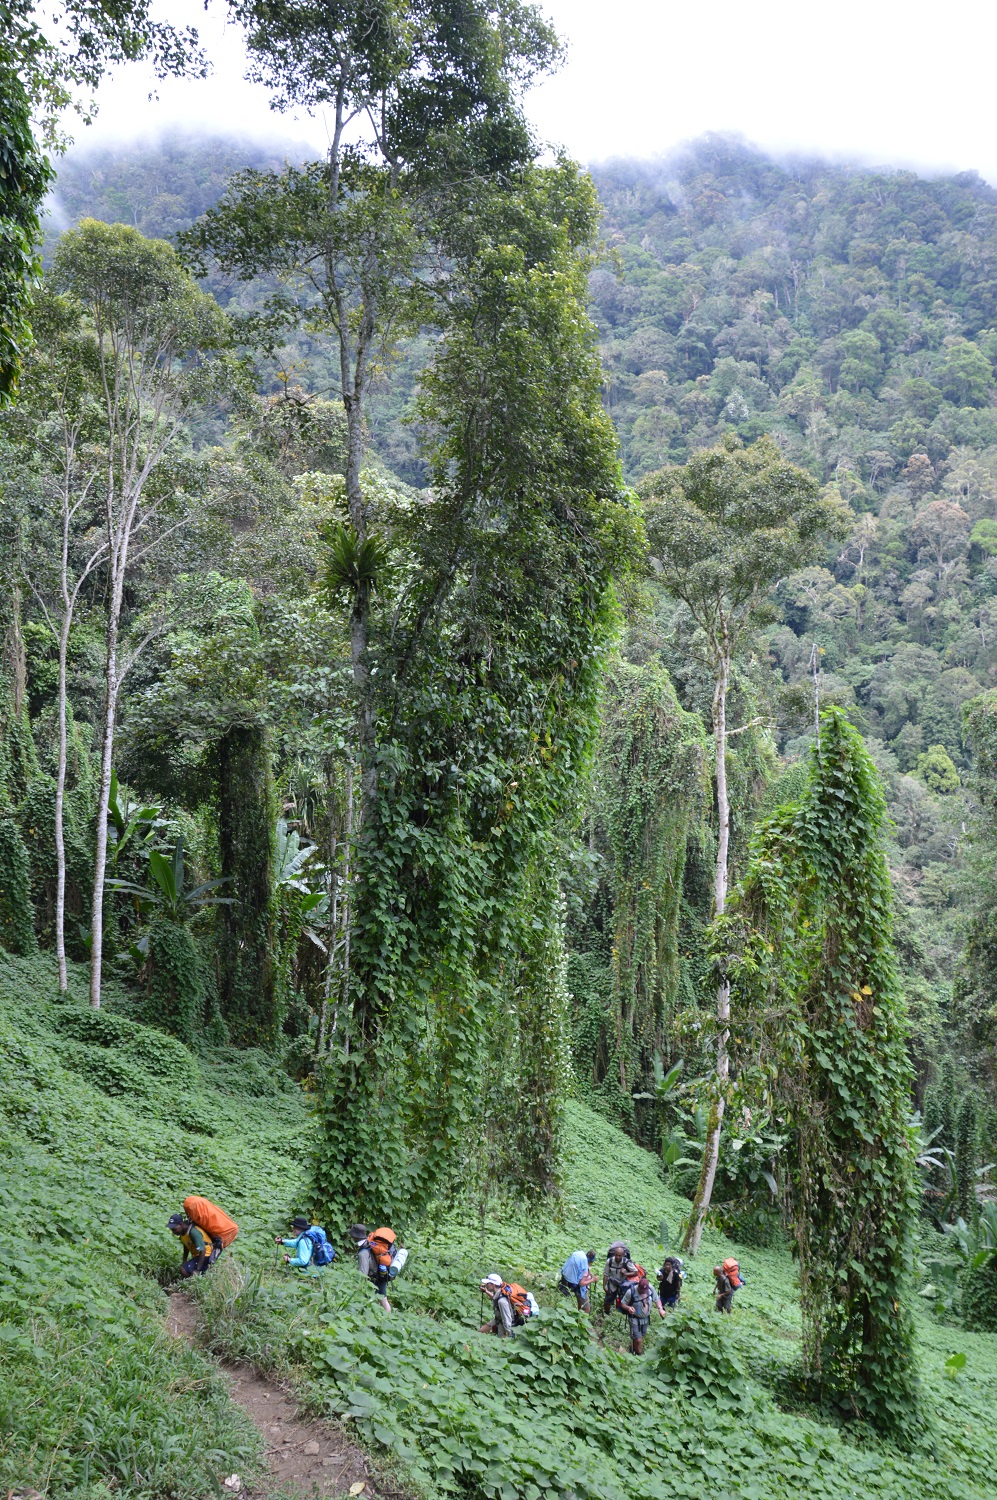 The Kokoda Track is Both A Physical & Mental Journey